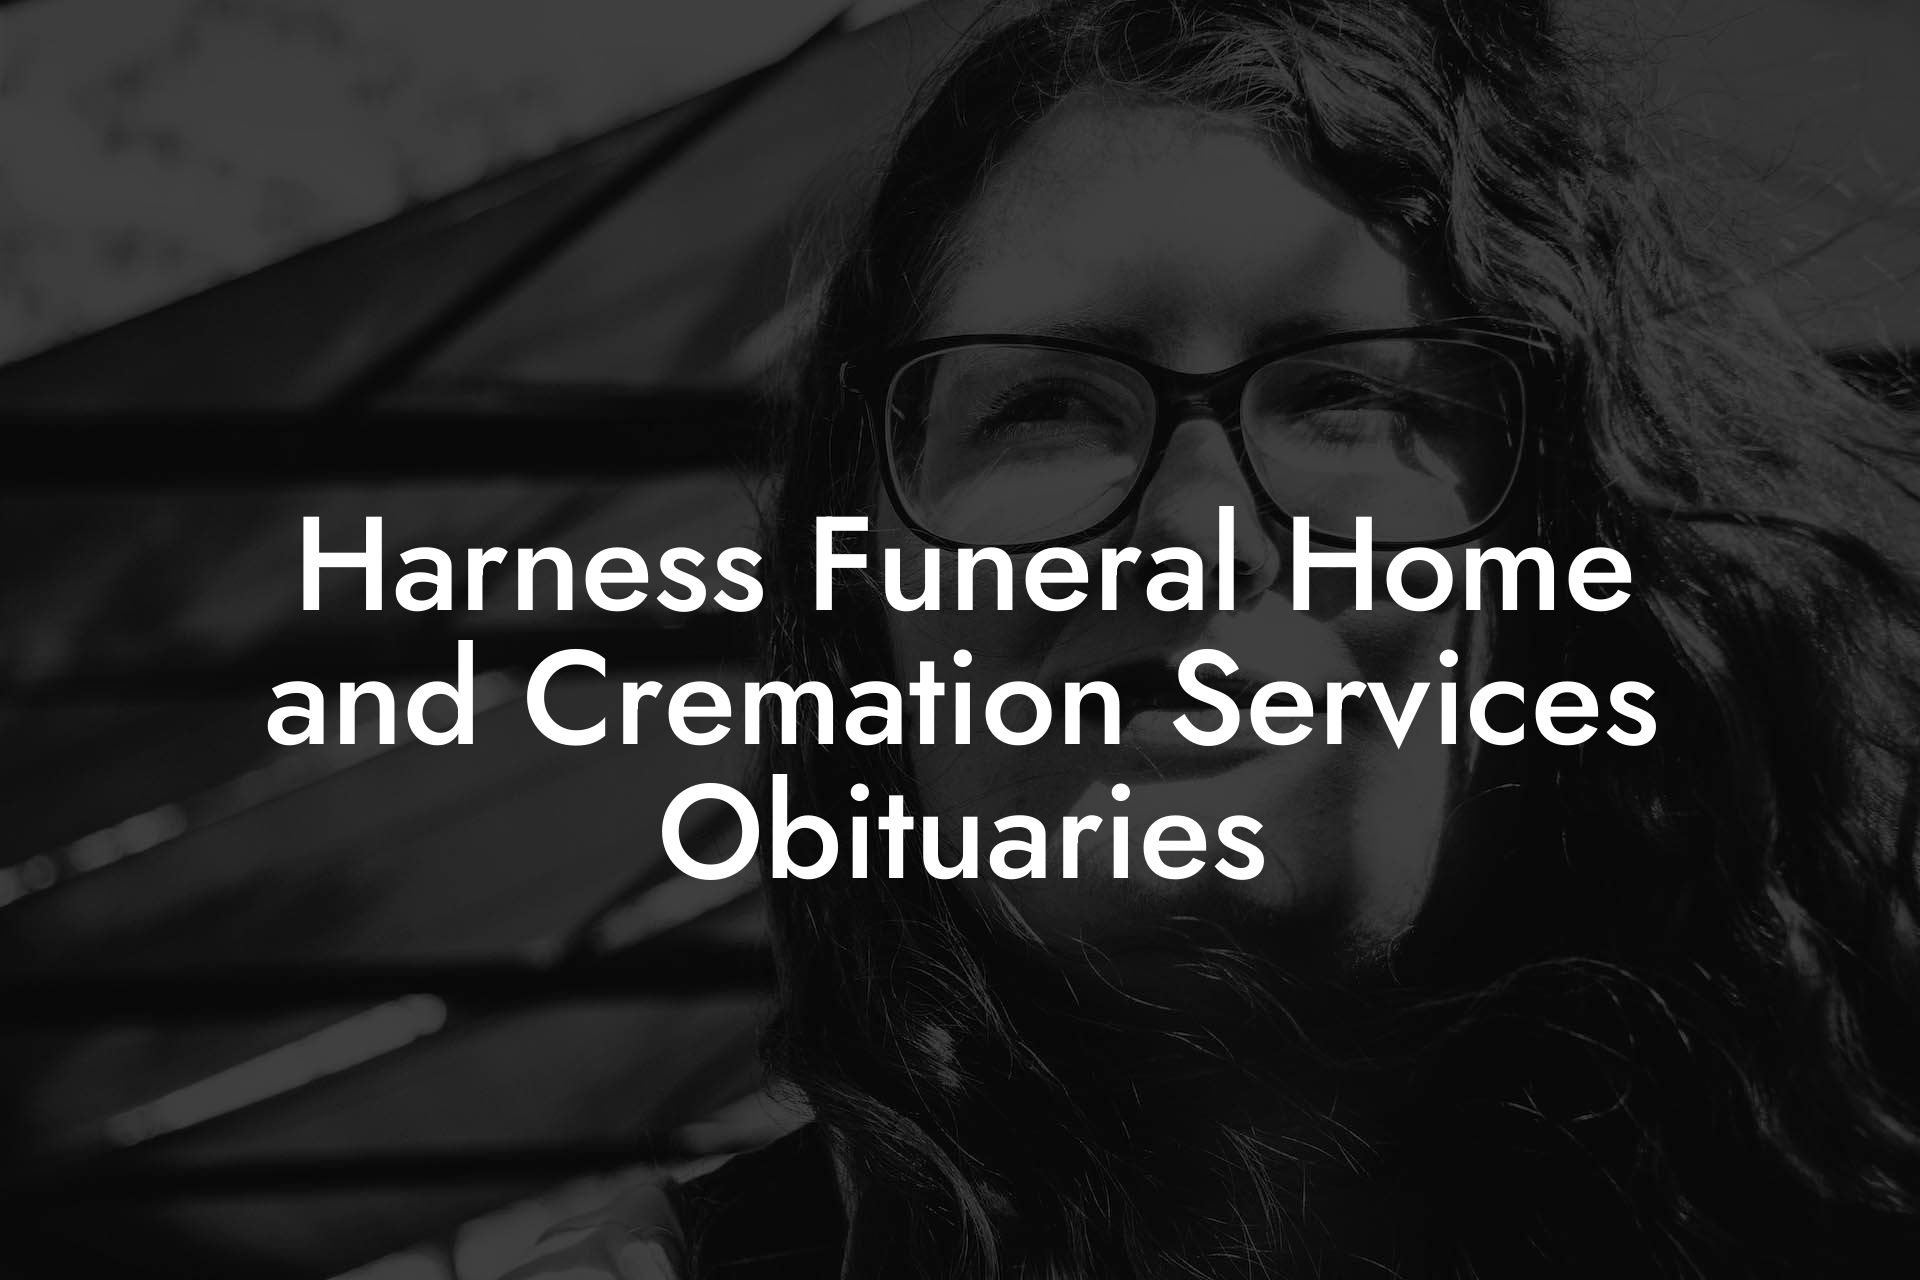 Harness Funeral Home and Cremation Services Obituaries